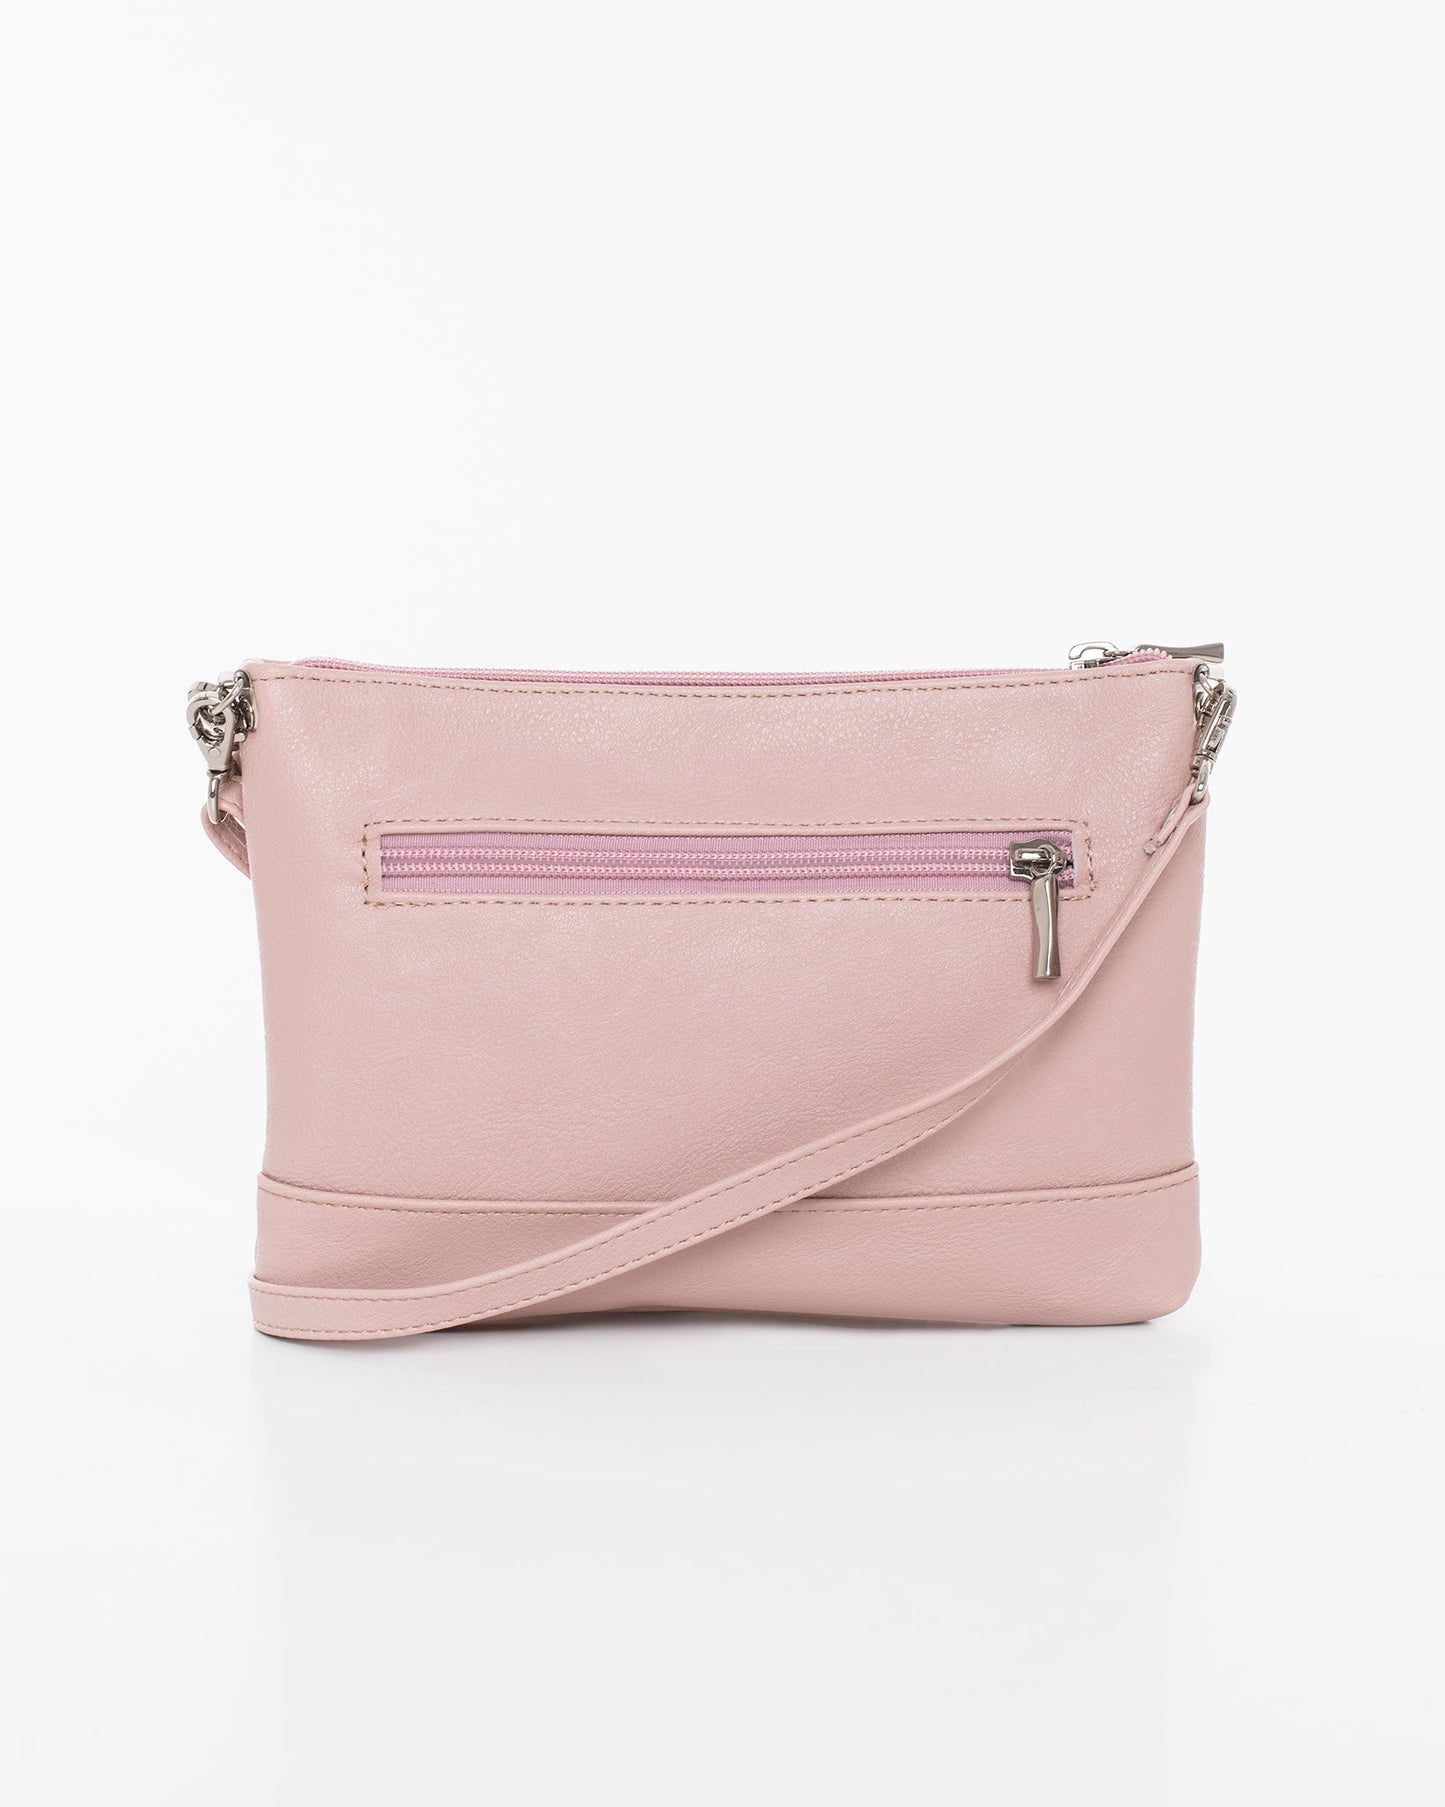 A popular Nabo Shoulder Bag - Nude with multiple zippered pockets, removable shoulder and wrist straps. Made in Finland. Dimensions: 22 x 15 x 3 cm.